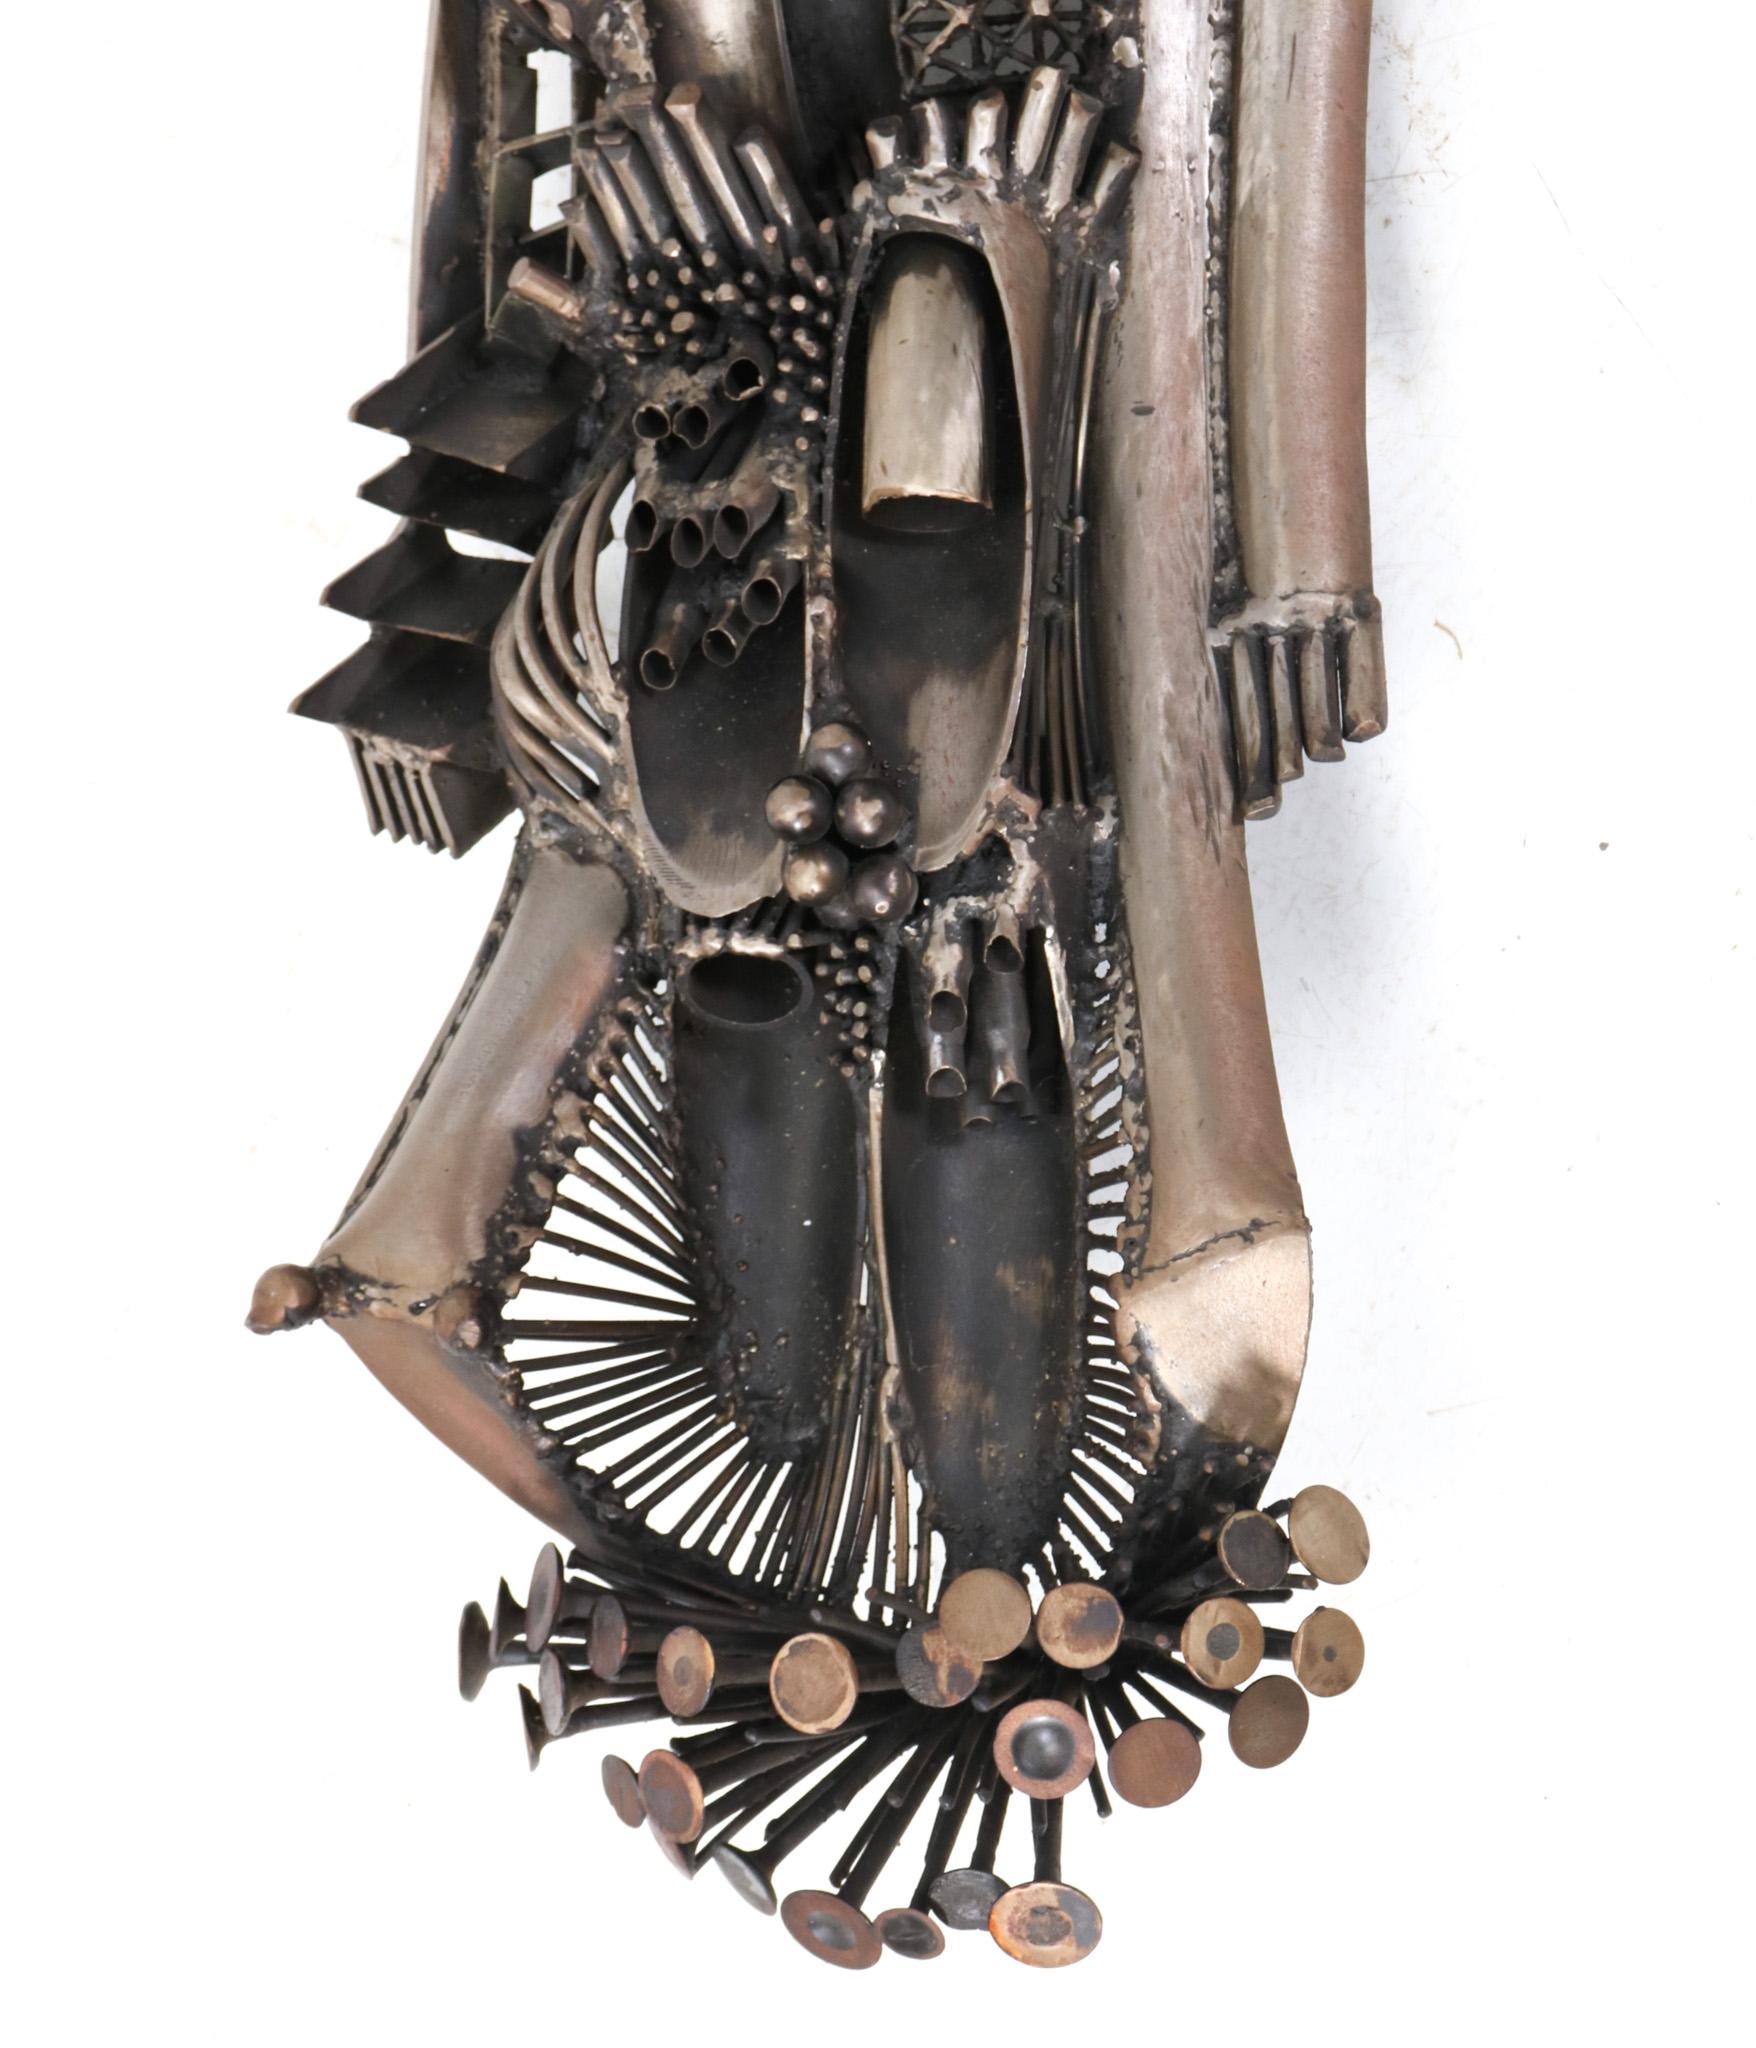 Brutalist Patinated Metal Abstract Sculpture by Frans de Boer Lichtveld, 1964 For Sale 2